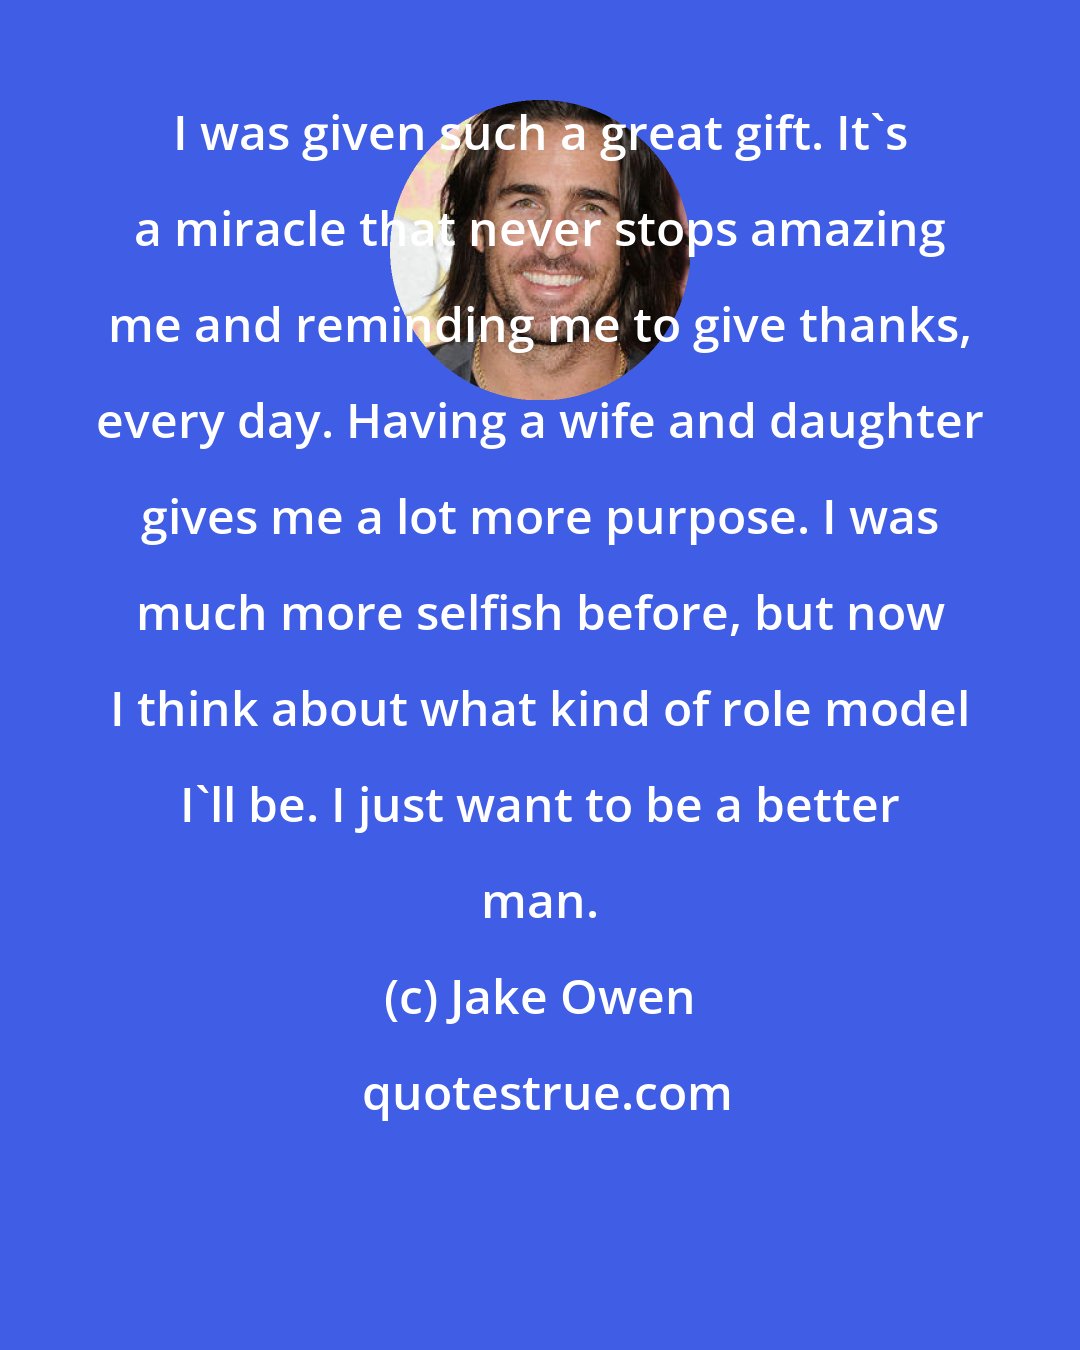 Jake Owen: I was given such a great gift. It's a miracle that never stops amazing me and reminding me to give thanks, every day. Having a wife and daughter gives me a lot more purpose. I was much more selfish before, but now I think about what kind of role model I'll be. I just want to be a better man.